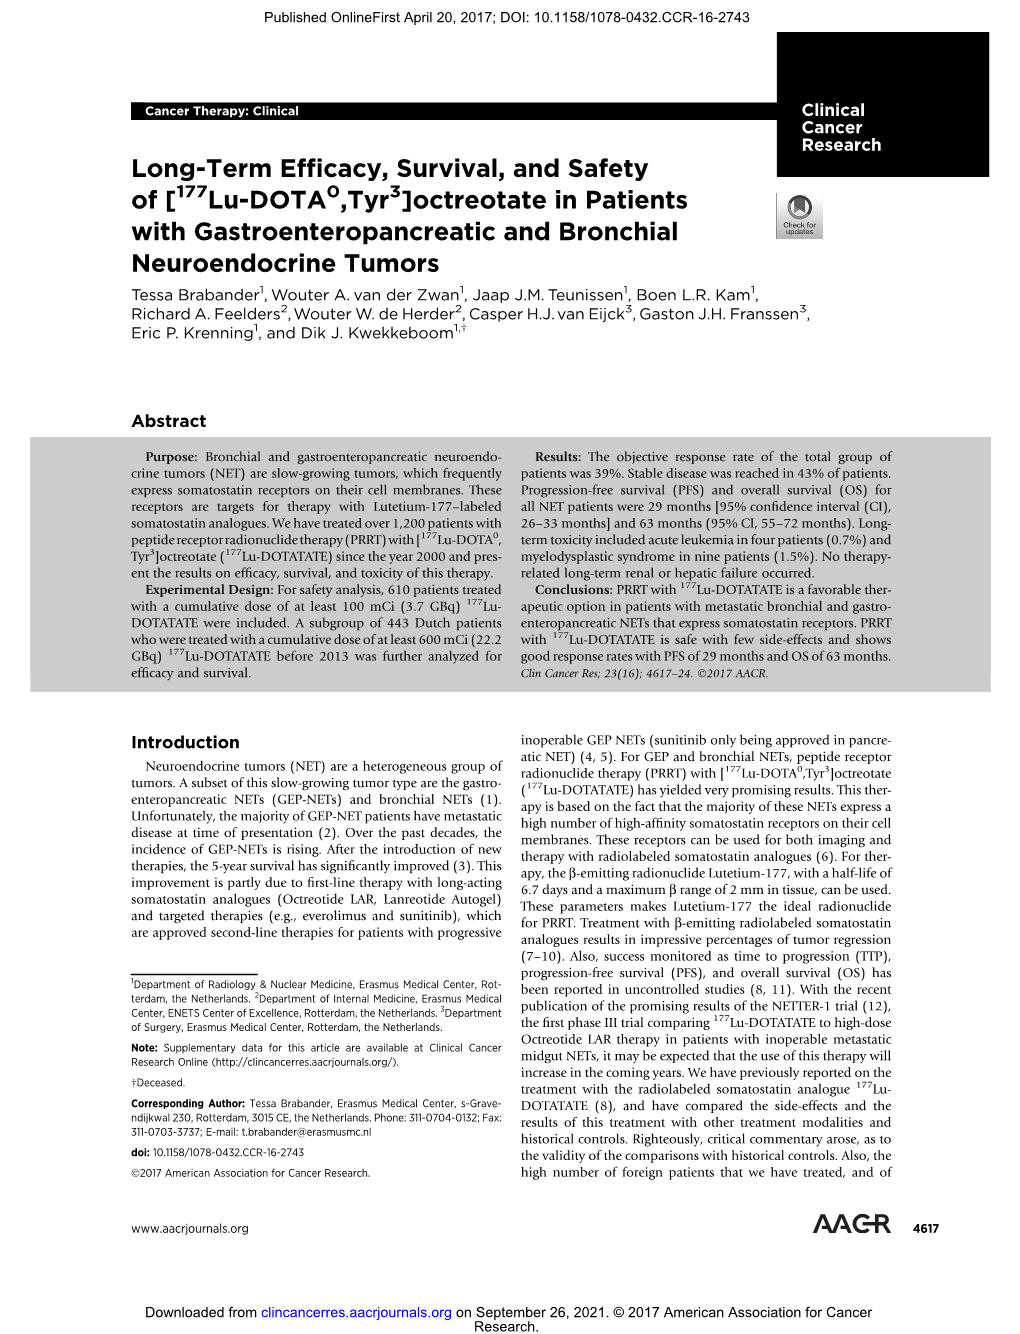 Long-Term Efficacy, Survival, and Safety of [ Lu-DOTA ,Tyr ]Octreotate in Patients with Gastroenteropancreatic and Bronchial